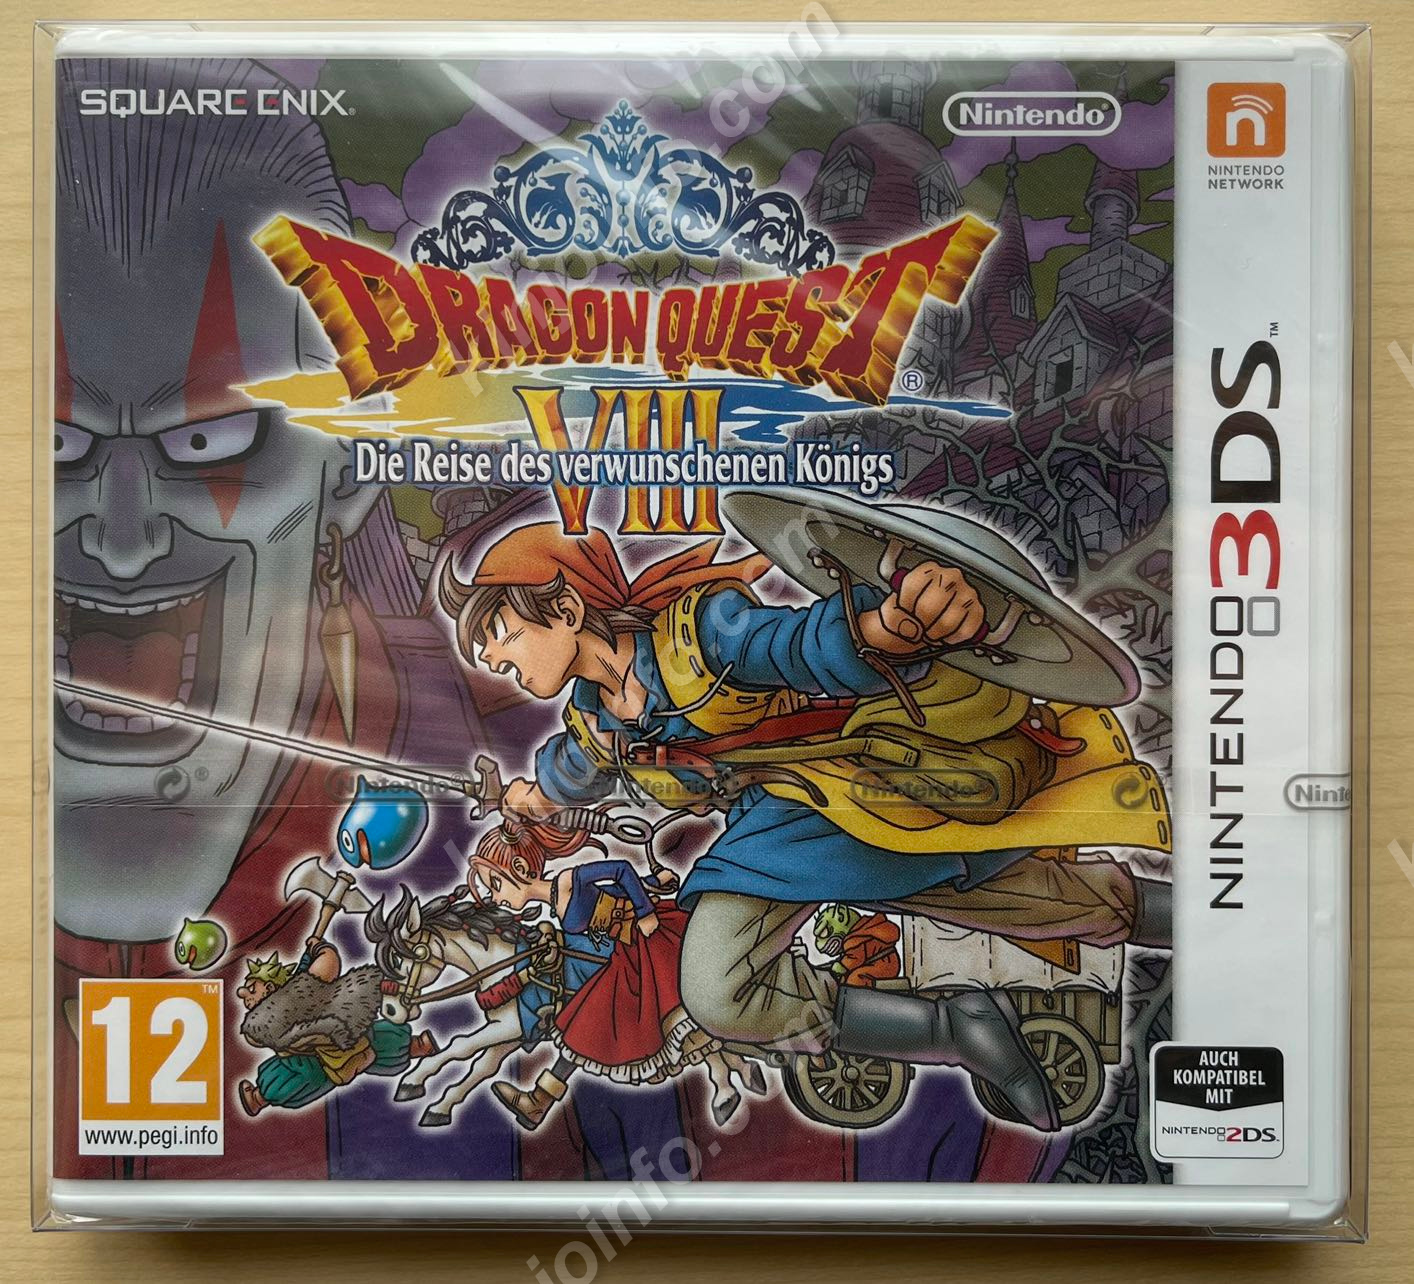 Dragon Quest VIII: Journey of the Cursed King【新品未開封・3DS欧州版】